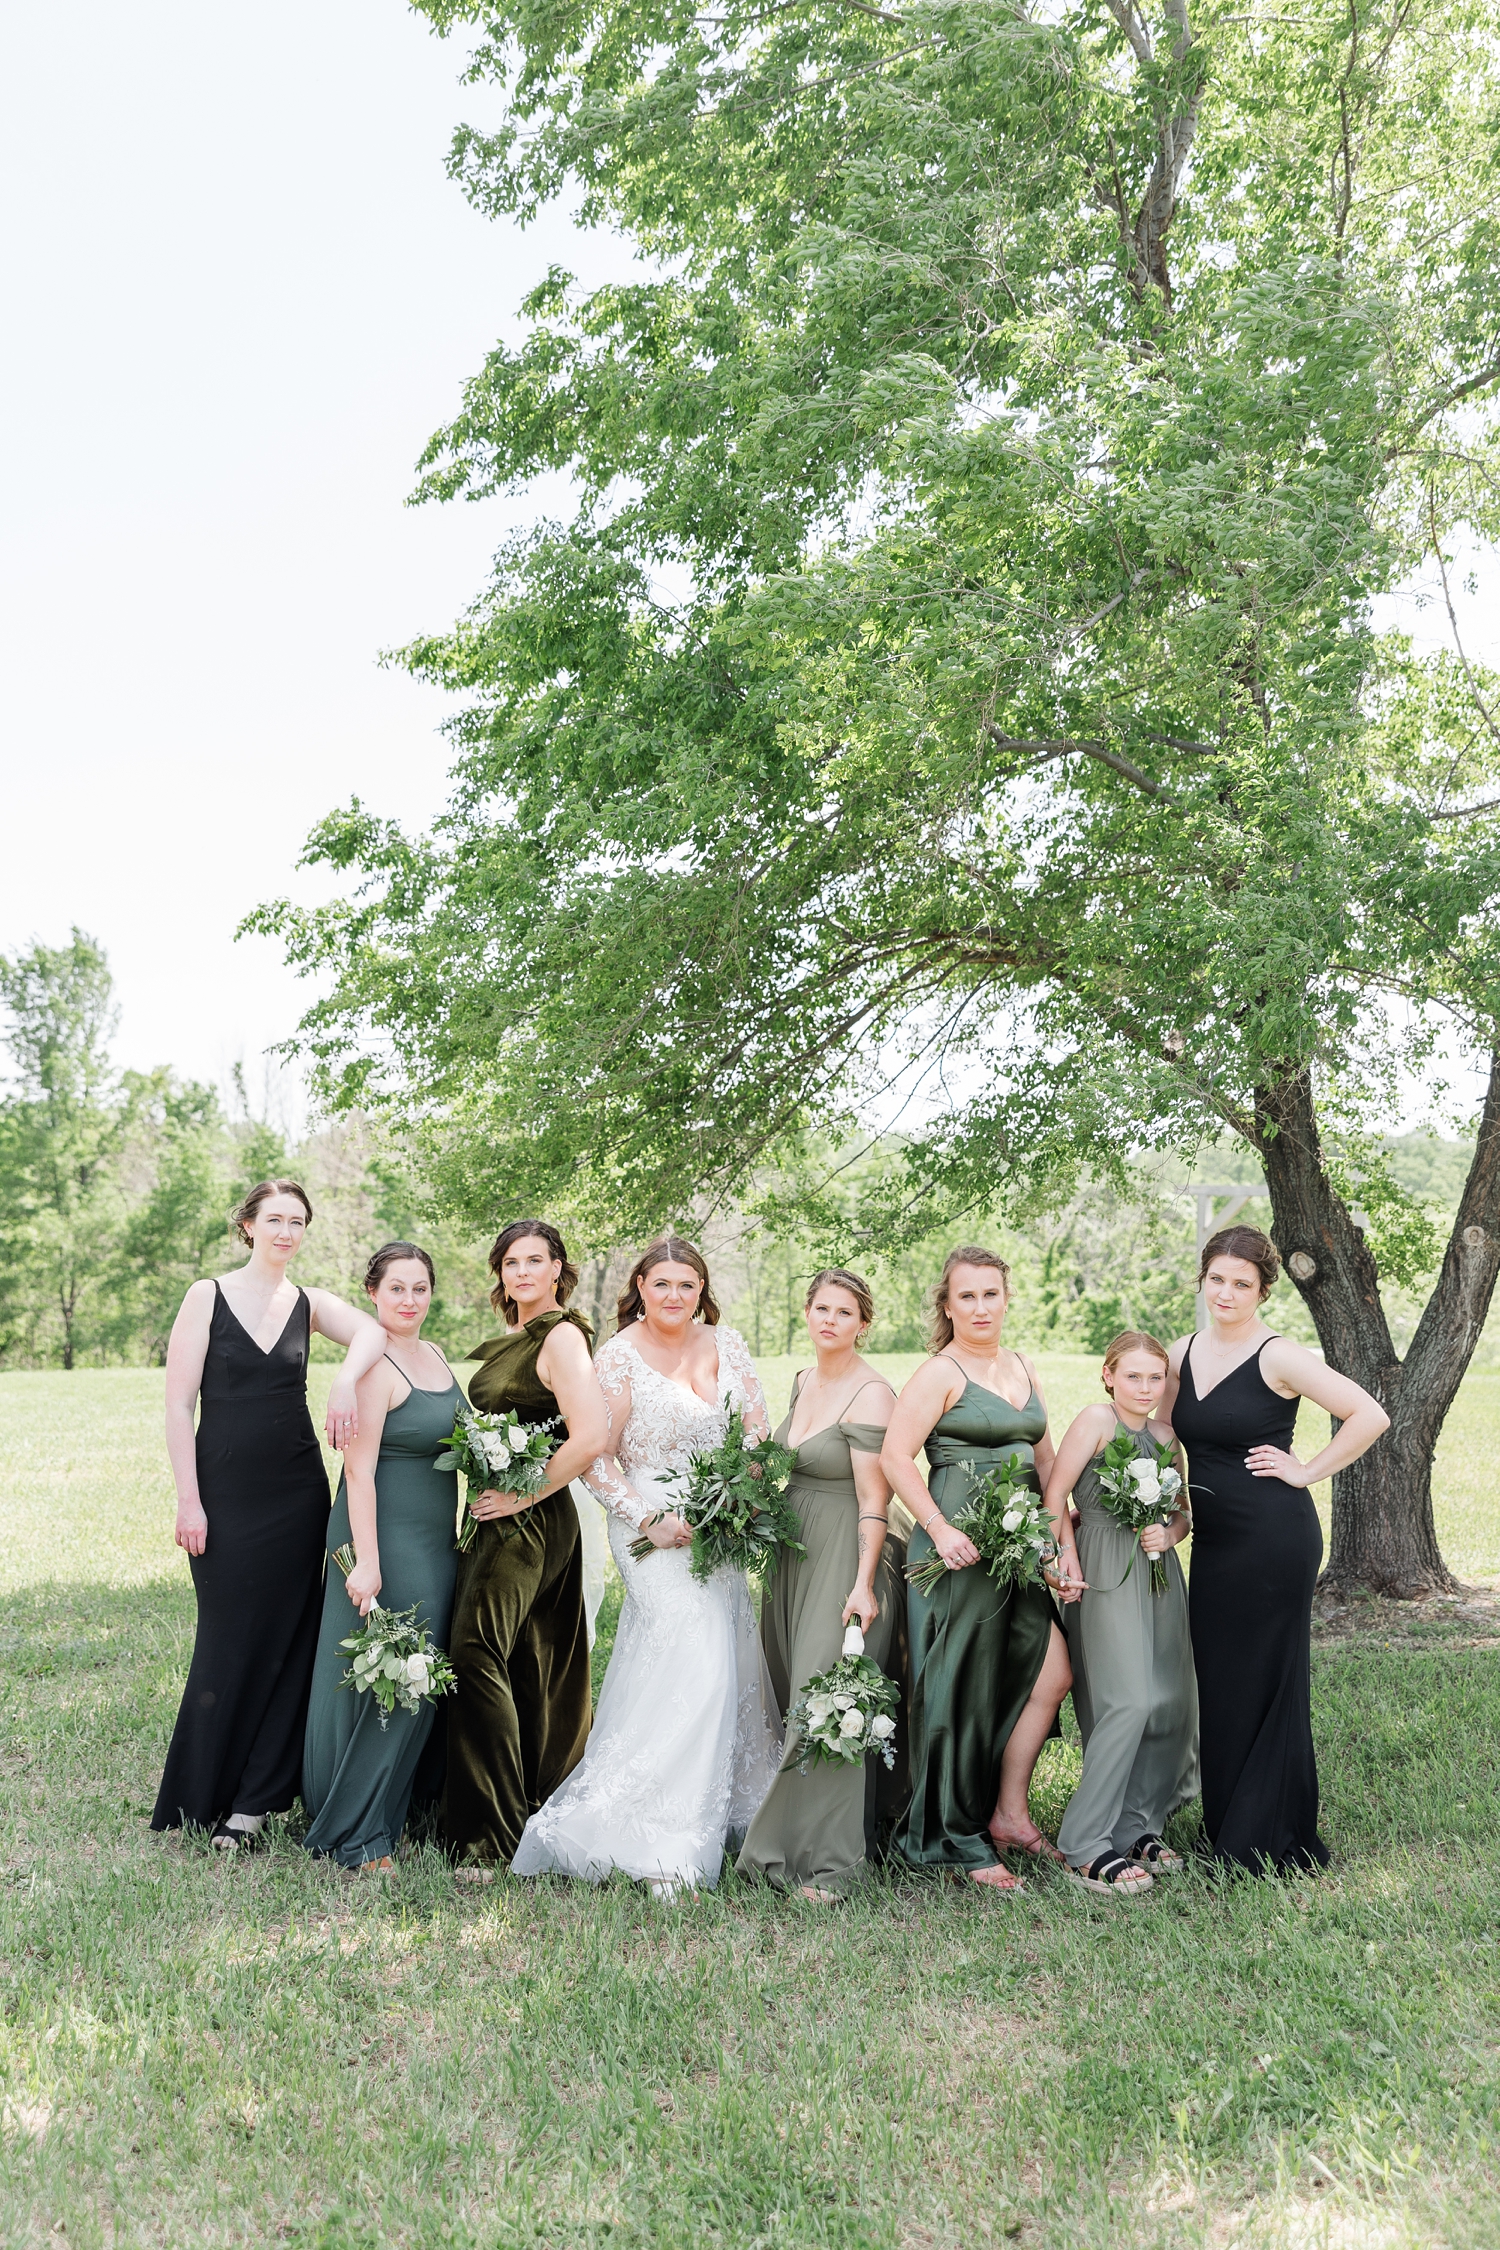 Neely model poses with her bridesmaids all wearing shades of olive green at Lizard Creek Ranch in Fort Dodge, IA | CB Studio 